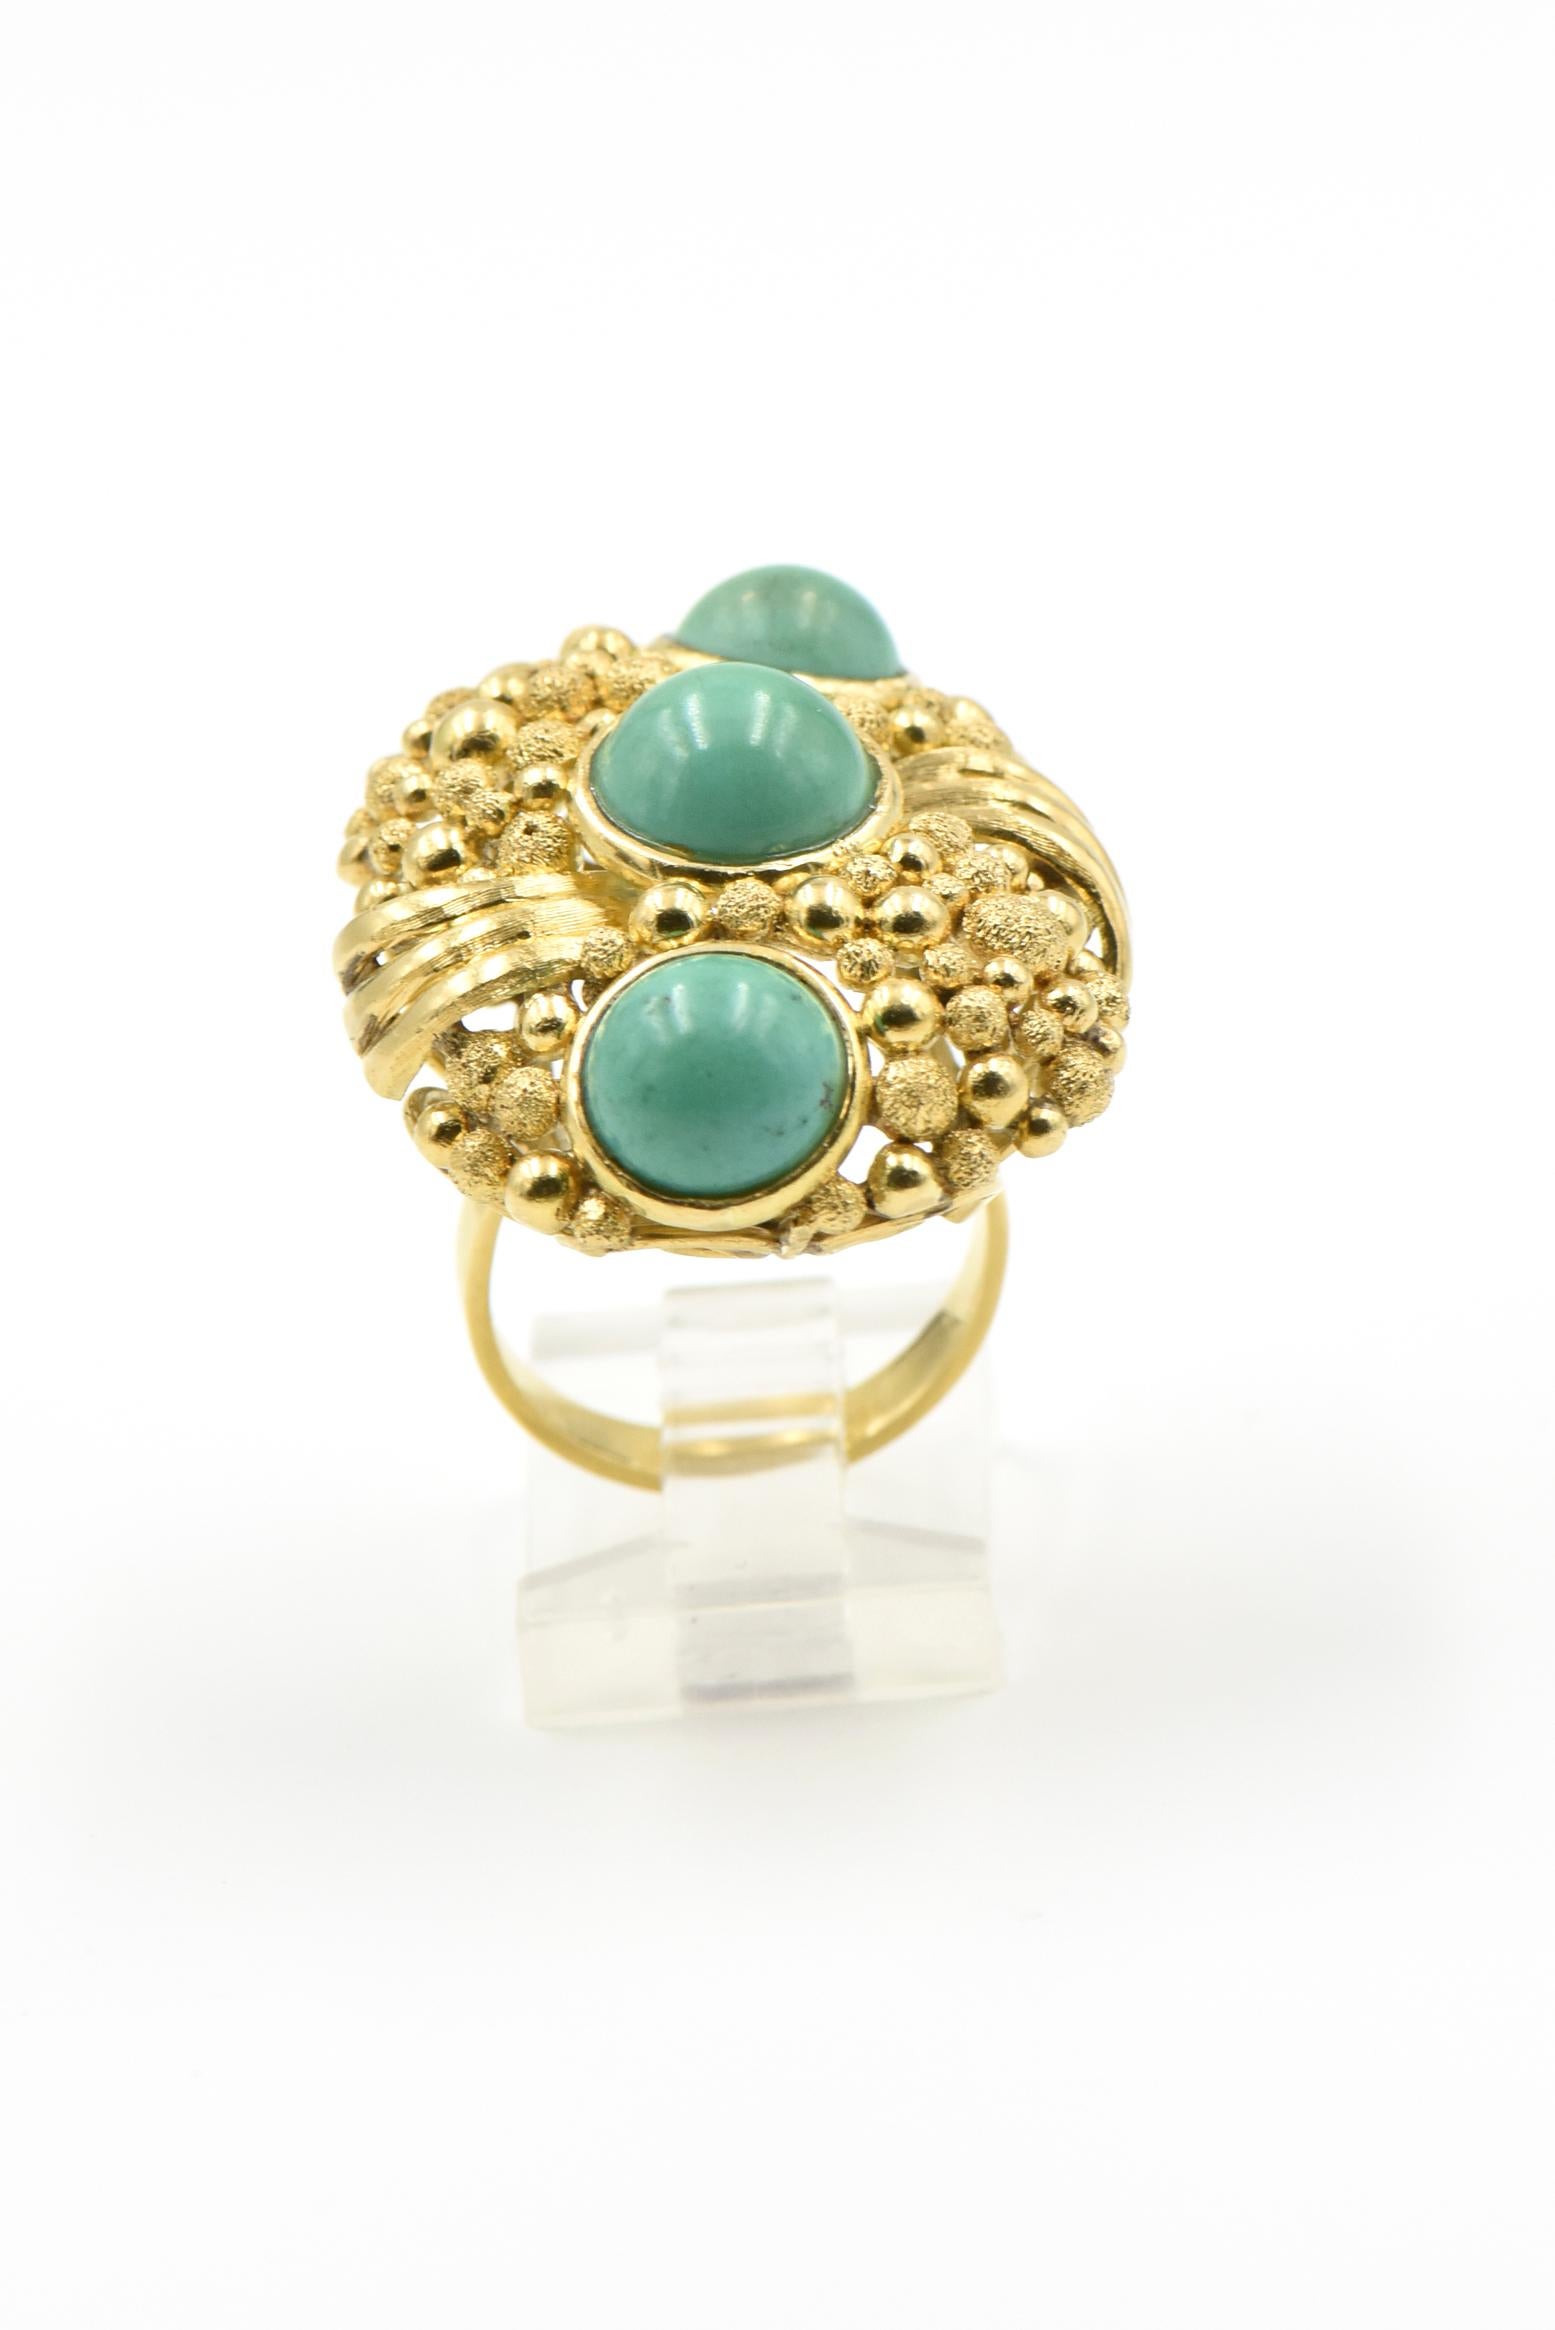 Large oval 18k ring made of textured and smooth bubbles that cover the surface of this impressive ring. Three cabochon turquoise pieces are bezel set down the middle to add great contrast. 

The ring is 1